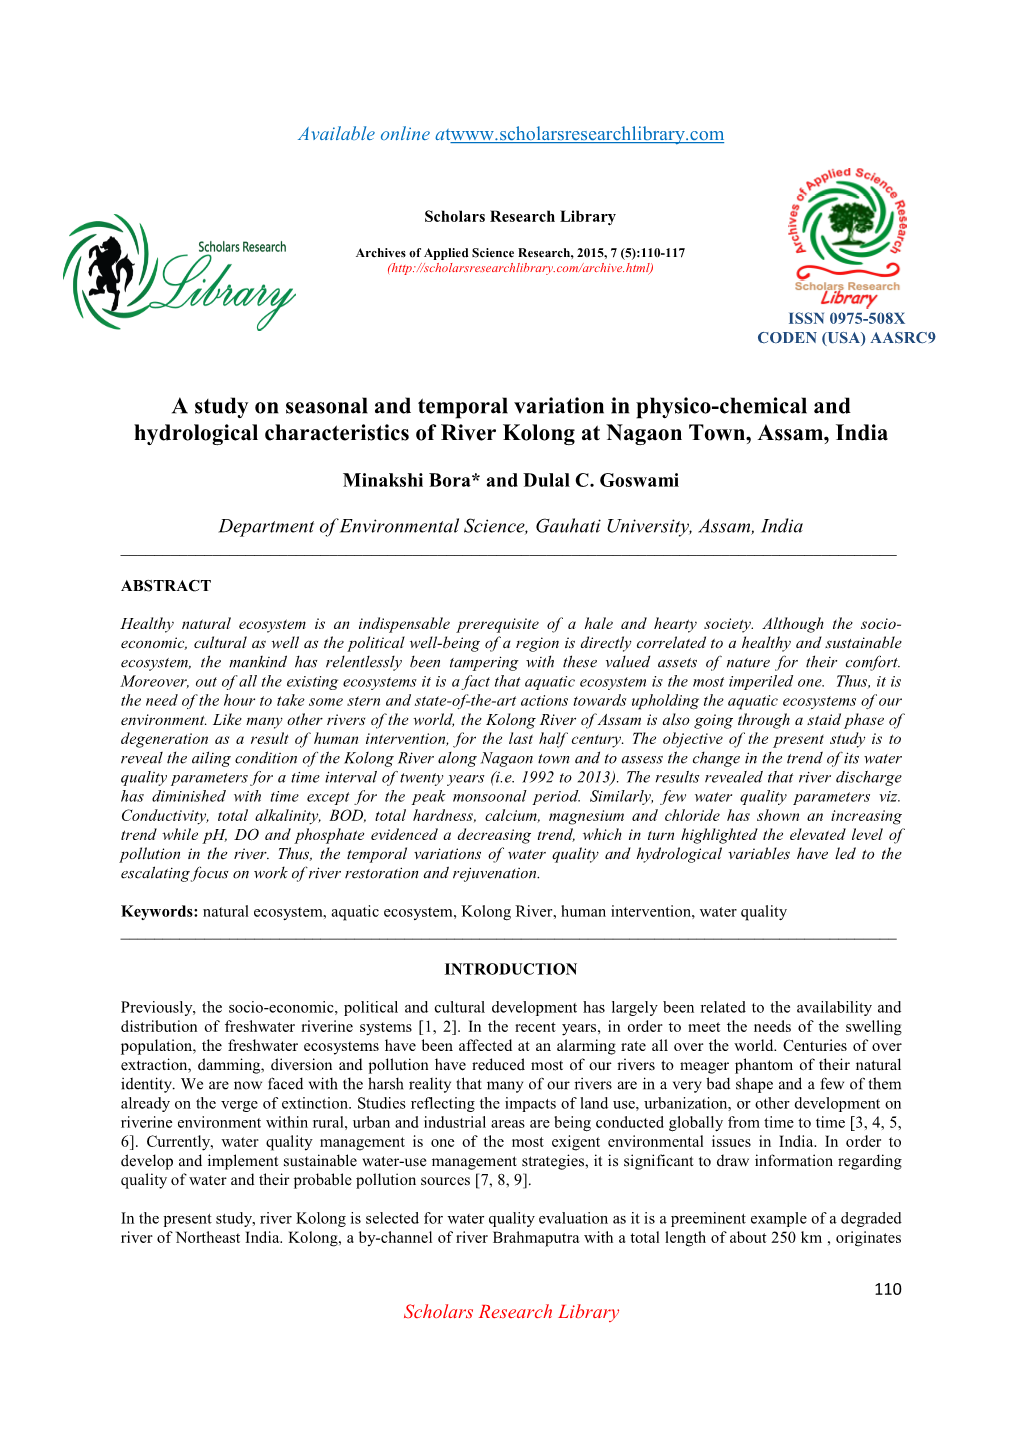 A Study on Seasonal and Temporal Variation in Physico-Chemical and Hydrological Characteristics of River Kolong at Nagaon Town, Assam, India